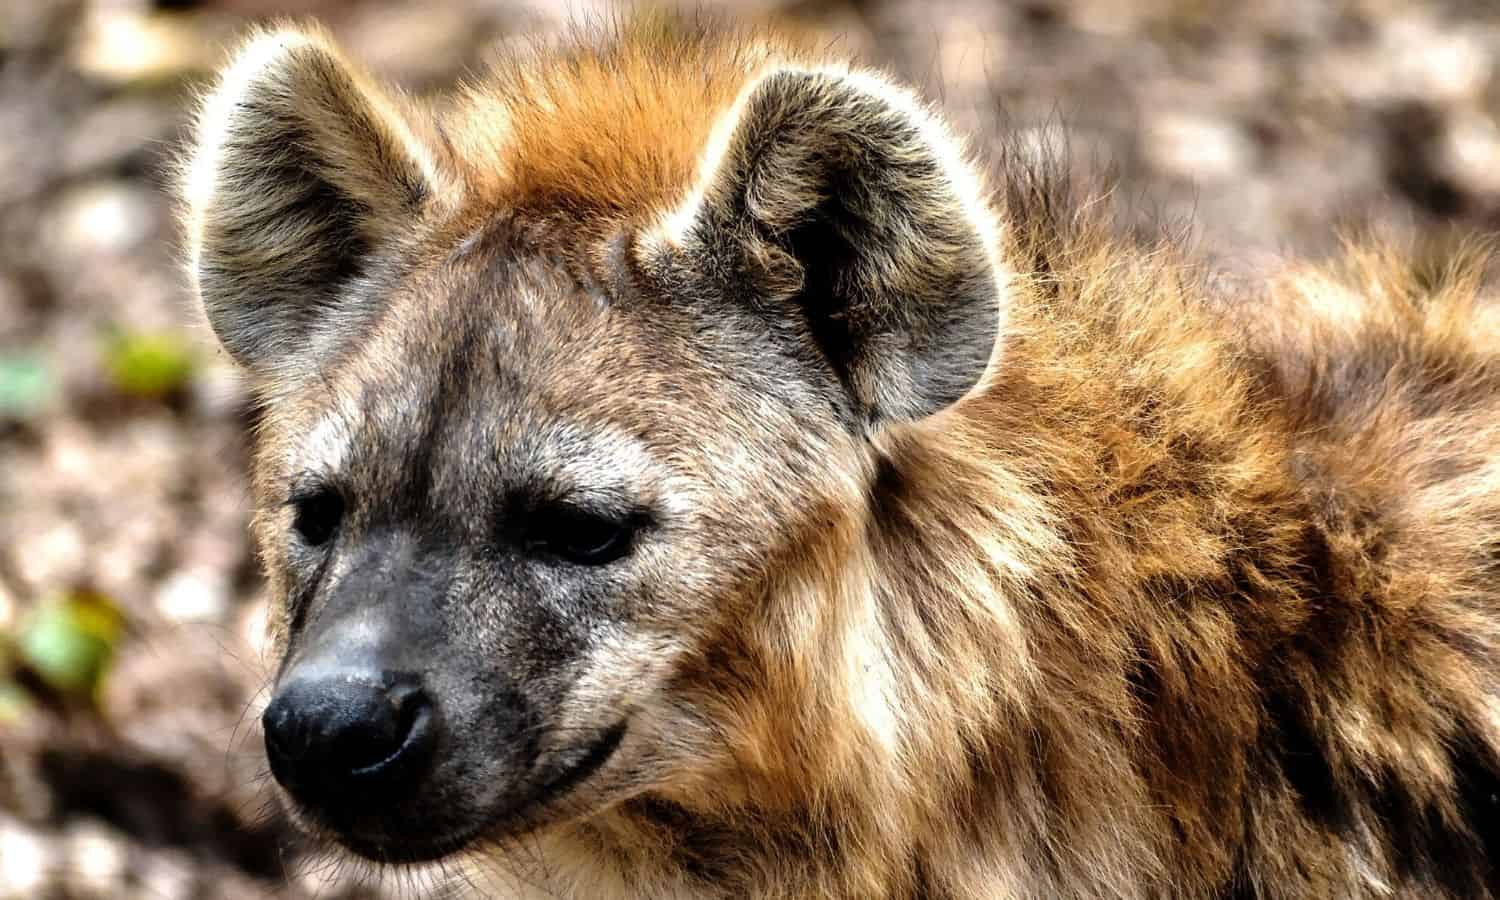 Hyena Survival Guide: How To Survive a Hyena Attack